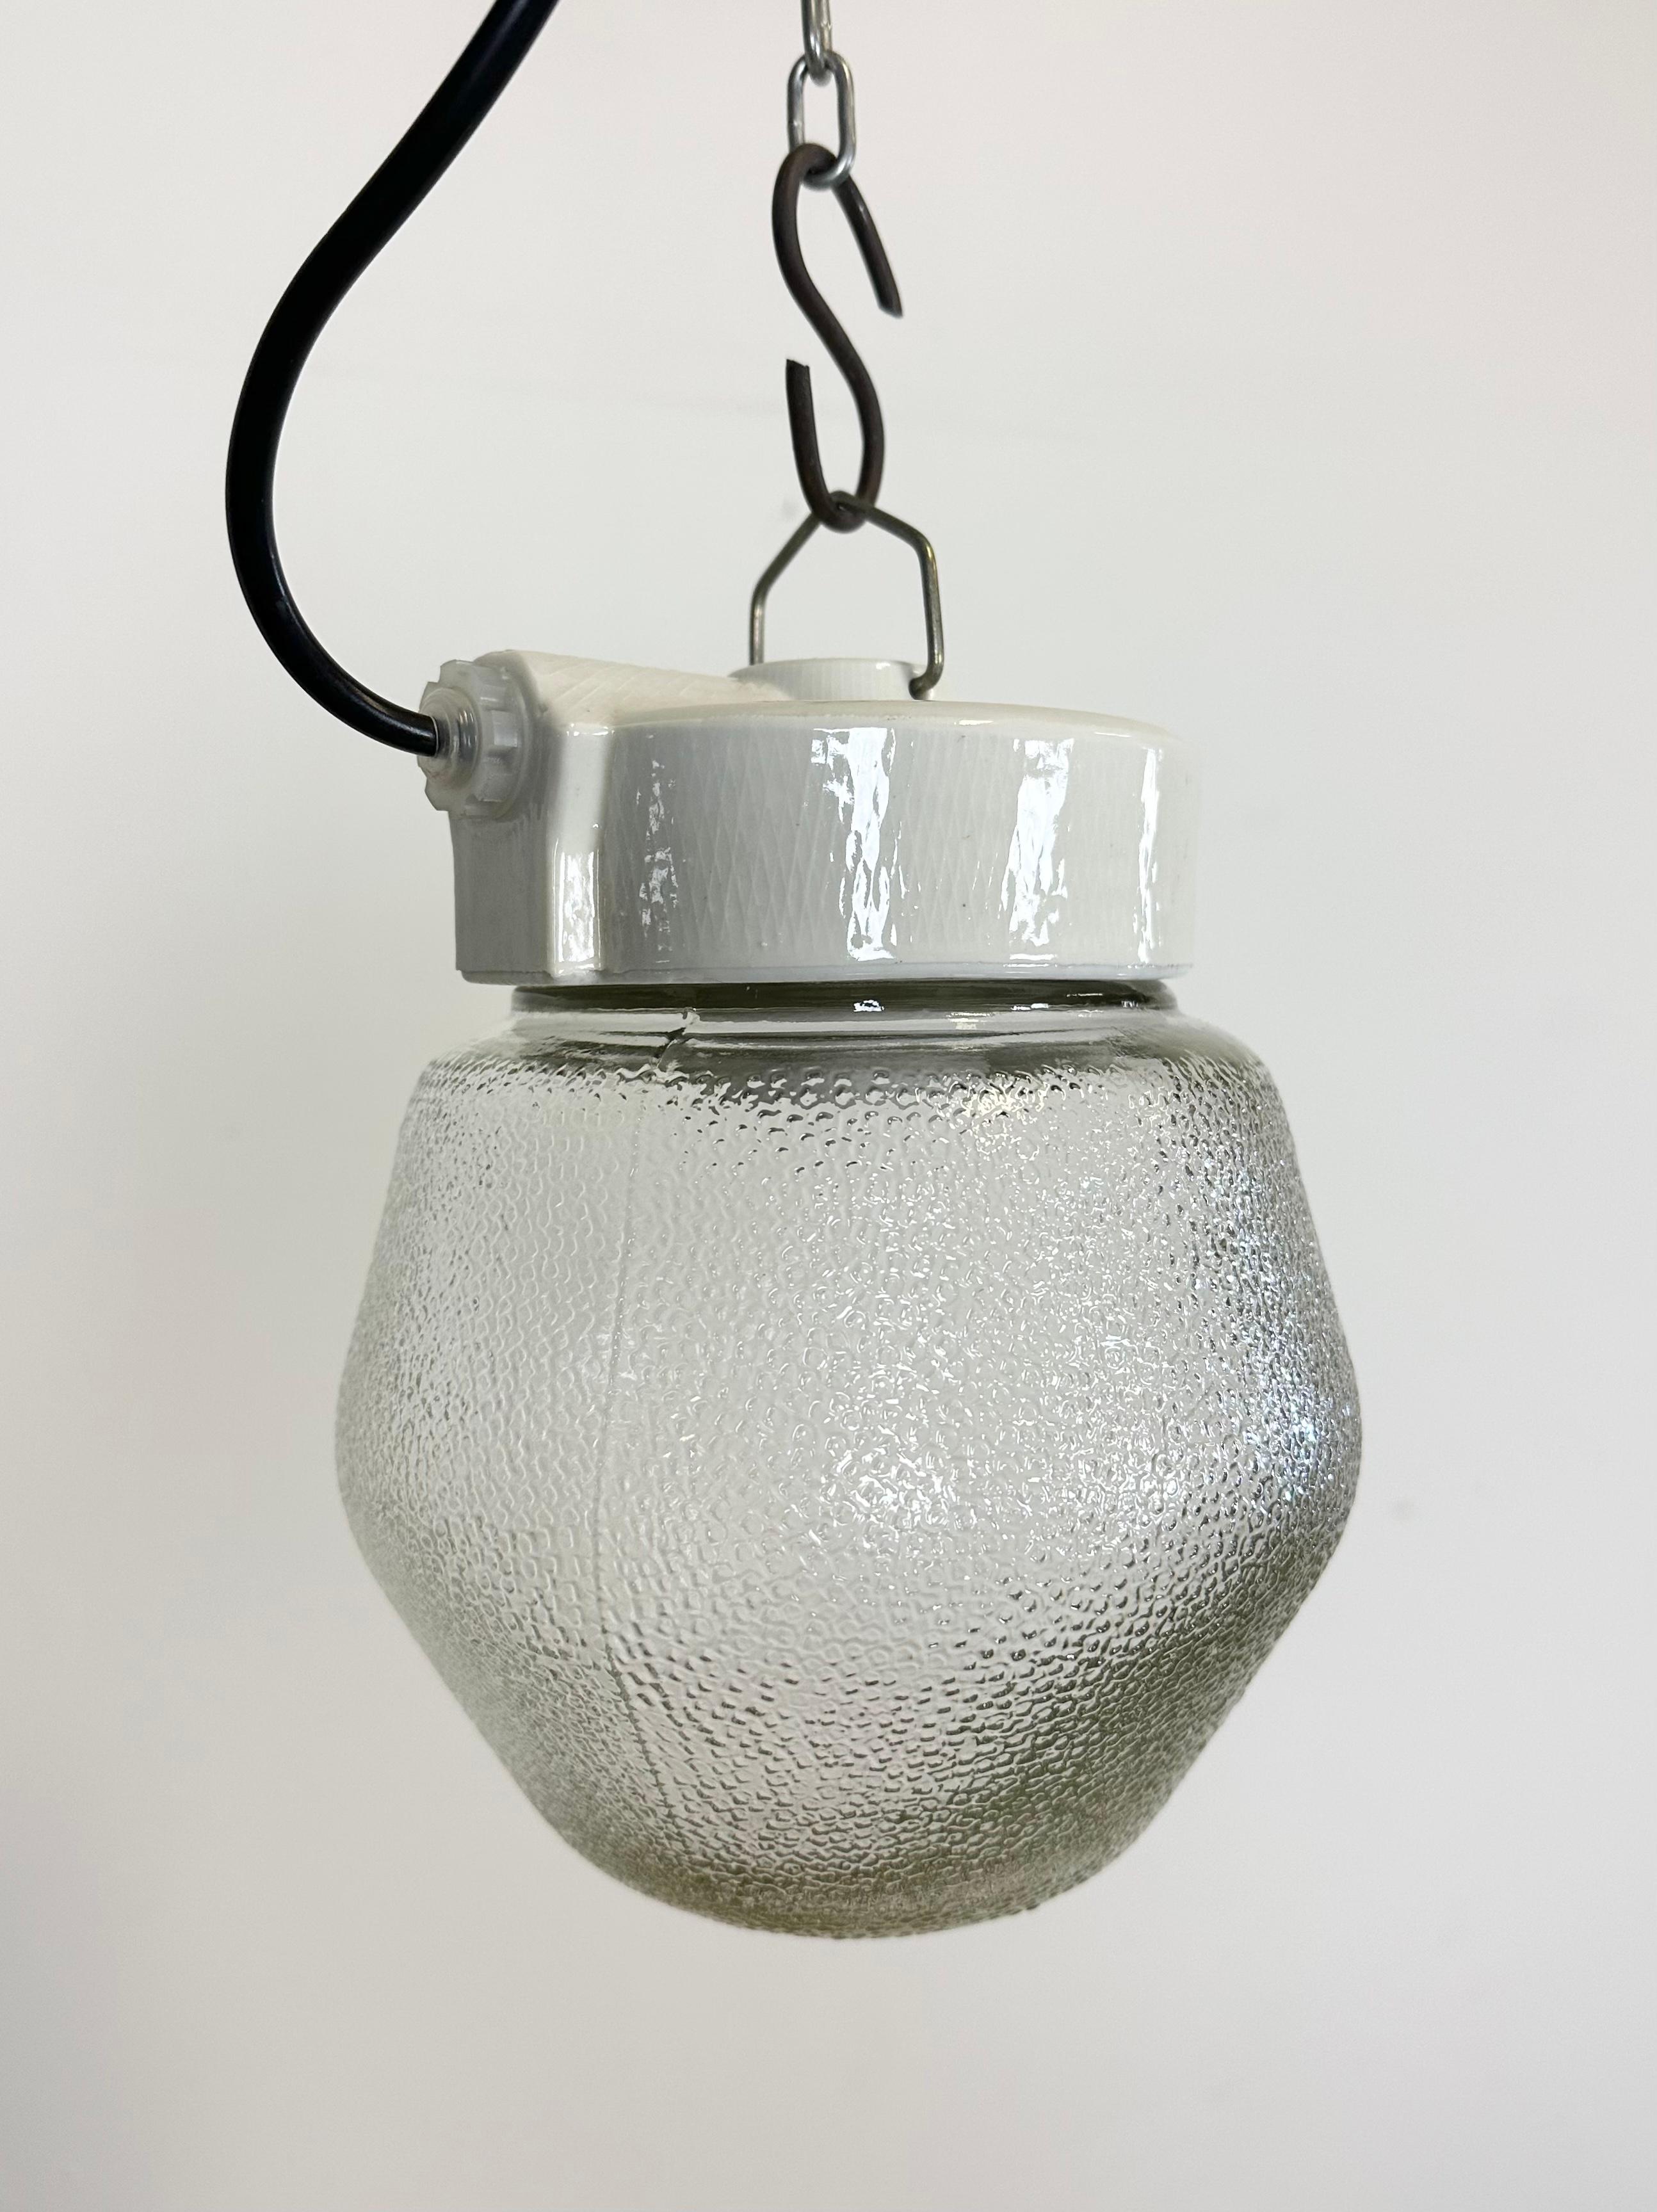 Vintage industrial light made in Poland during the 1970s. It features a white porcelain top and a frosted glass cover. The socket requires E27/ E26 light bulbs. New wire. The weight of the light is 1 kg.